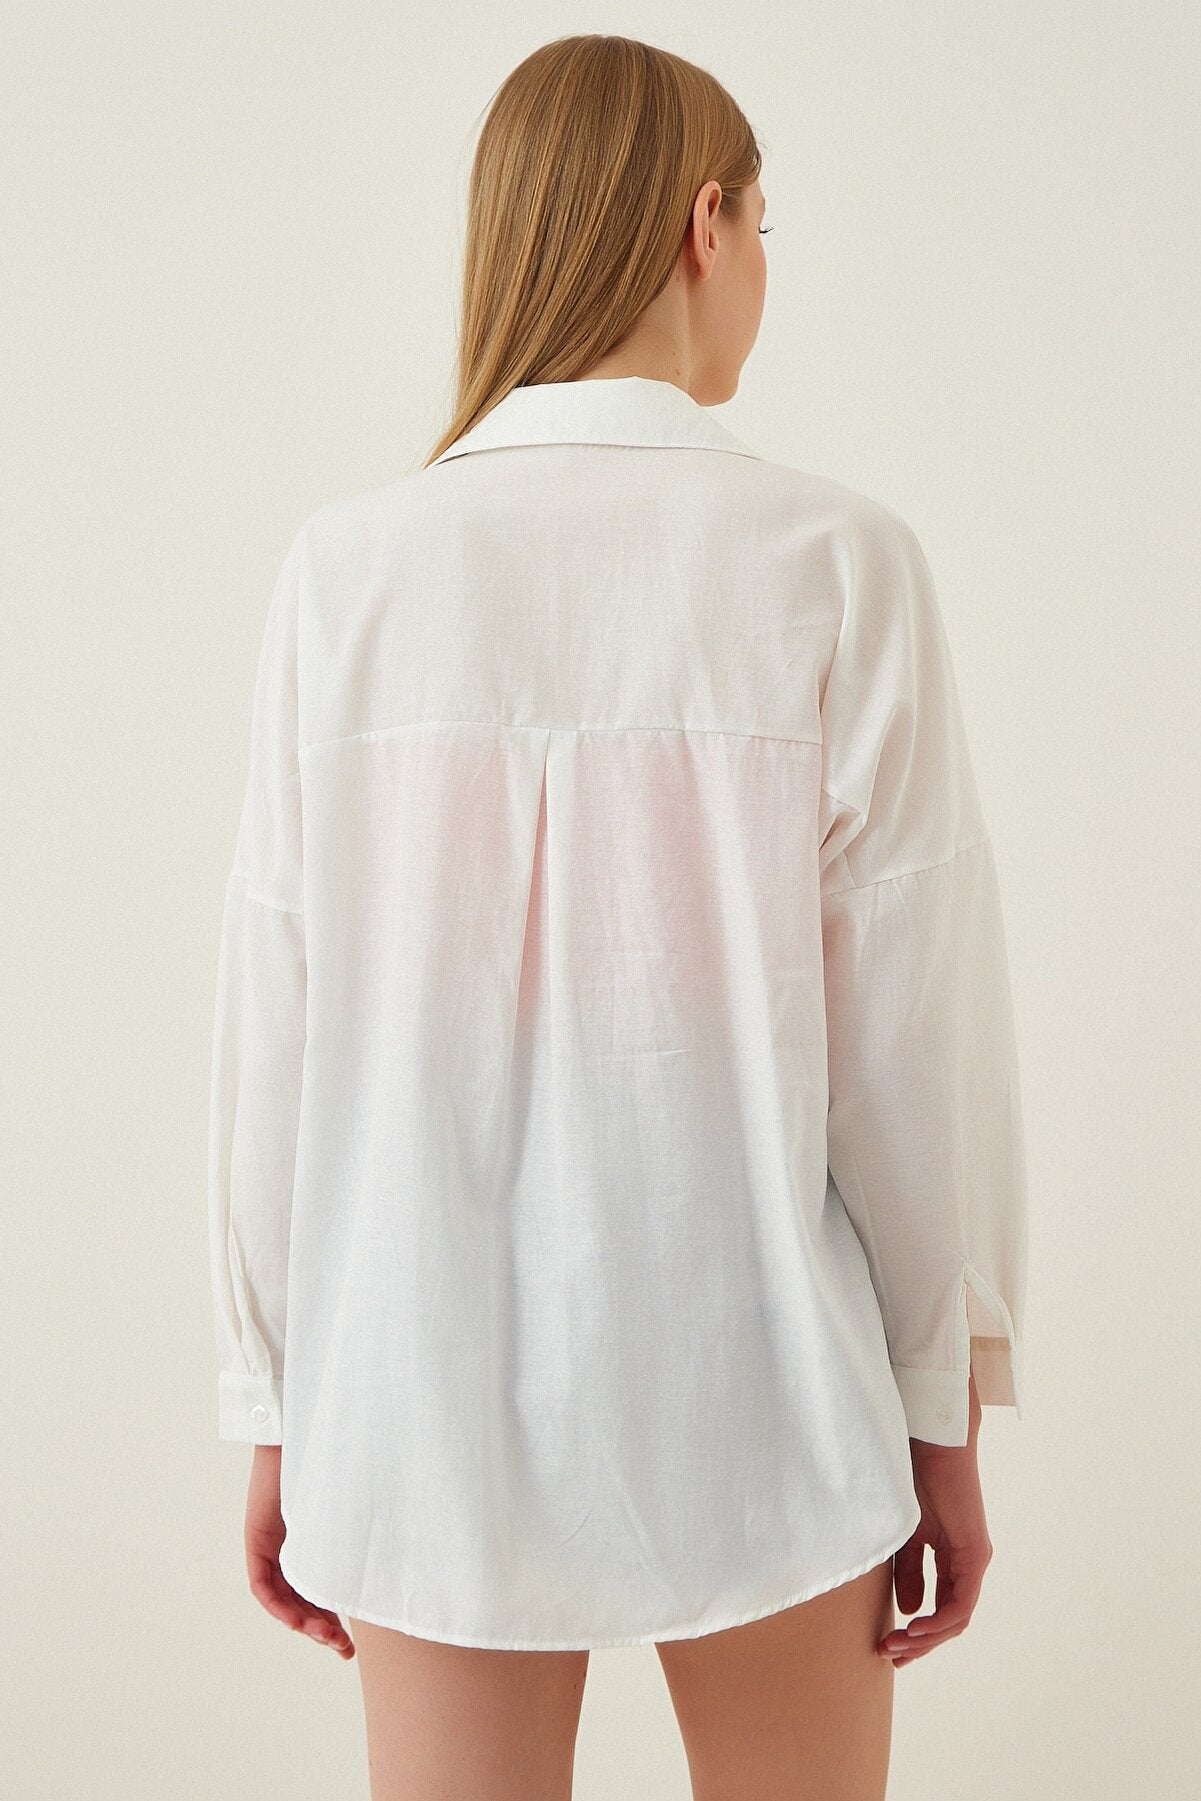 HAPPINESS IST OVERSIZED BUTTON SHIRT - WHITE